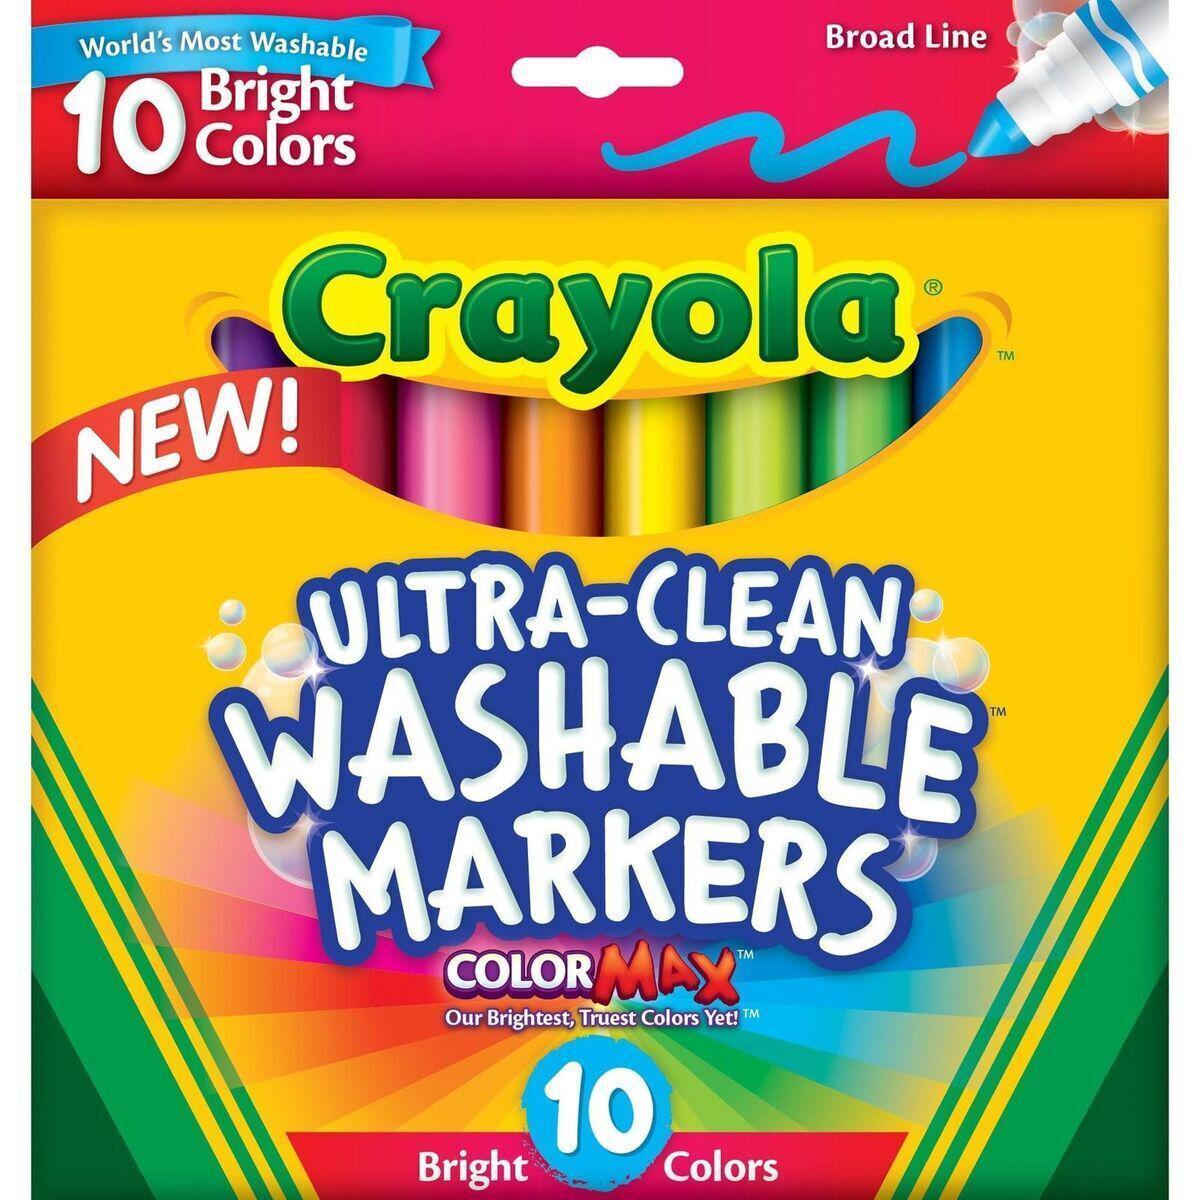 Crayola Ultra-Clean Washable Broad Line Marker 10 Assorted Bright Colors